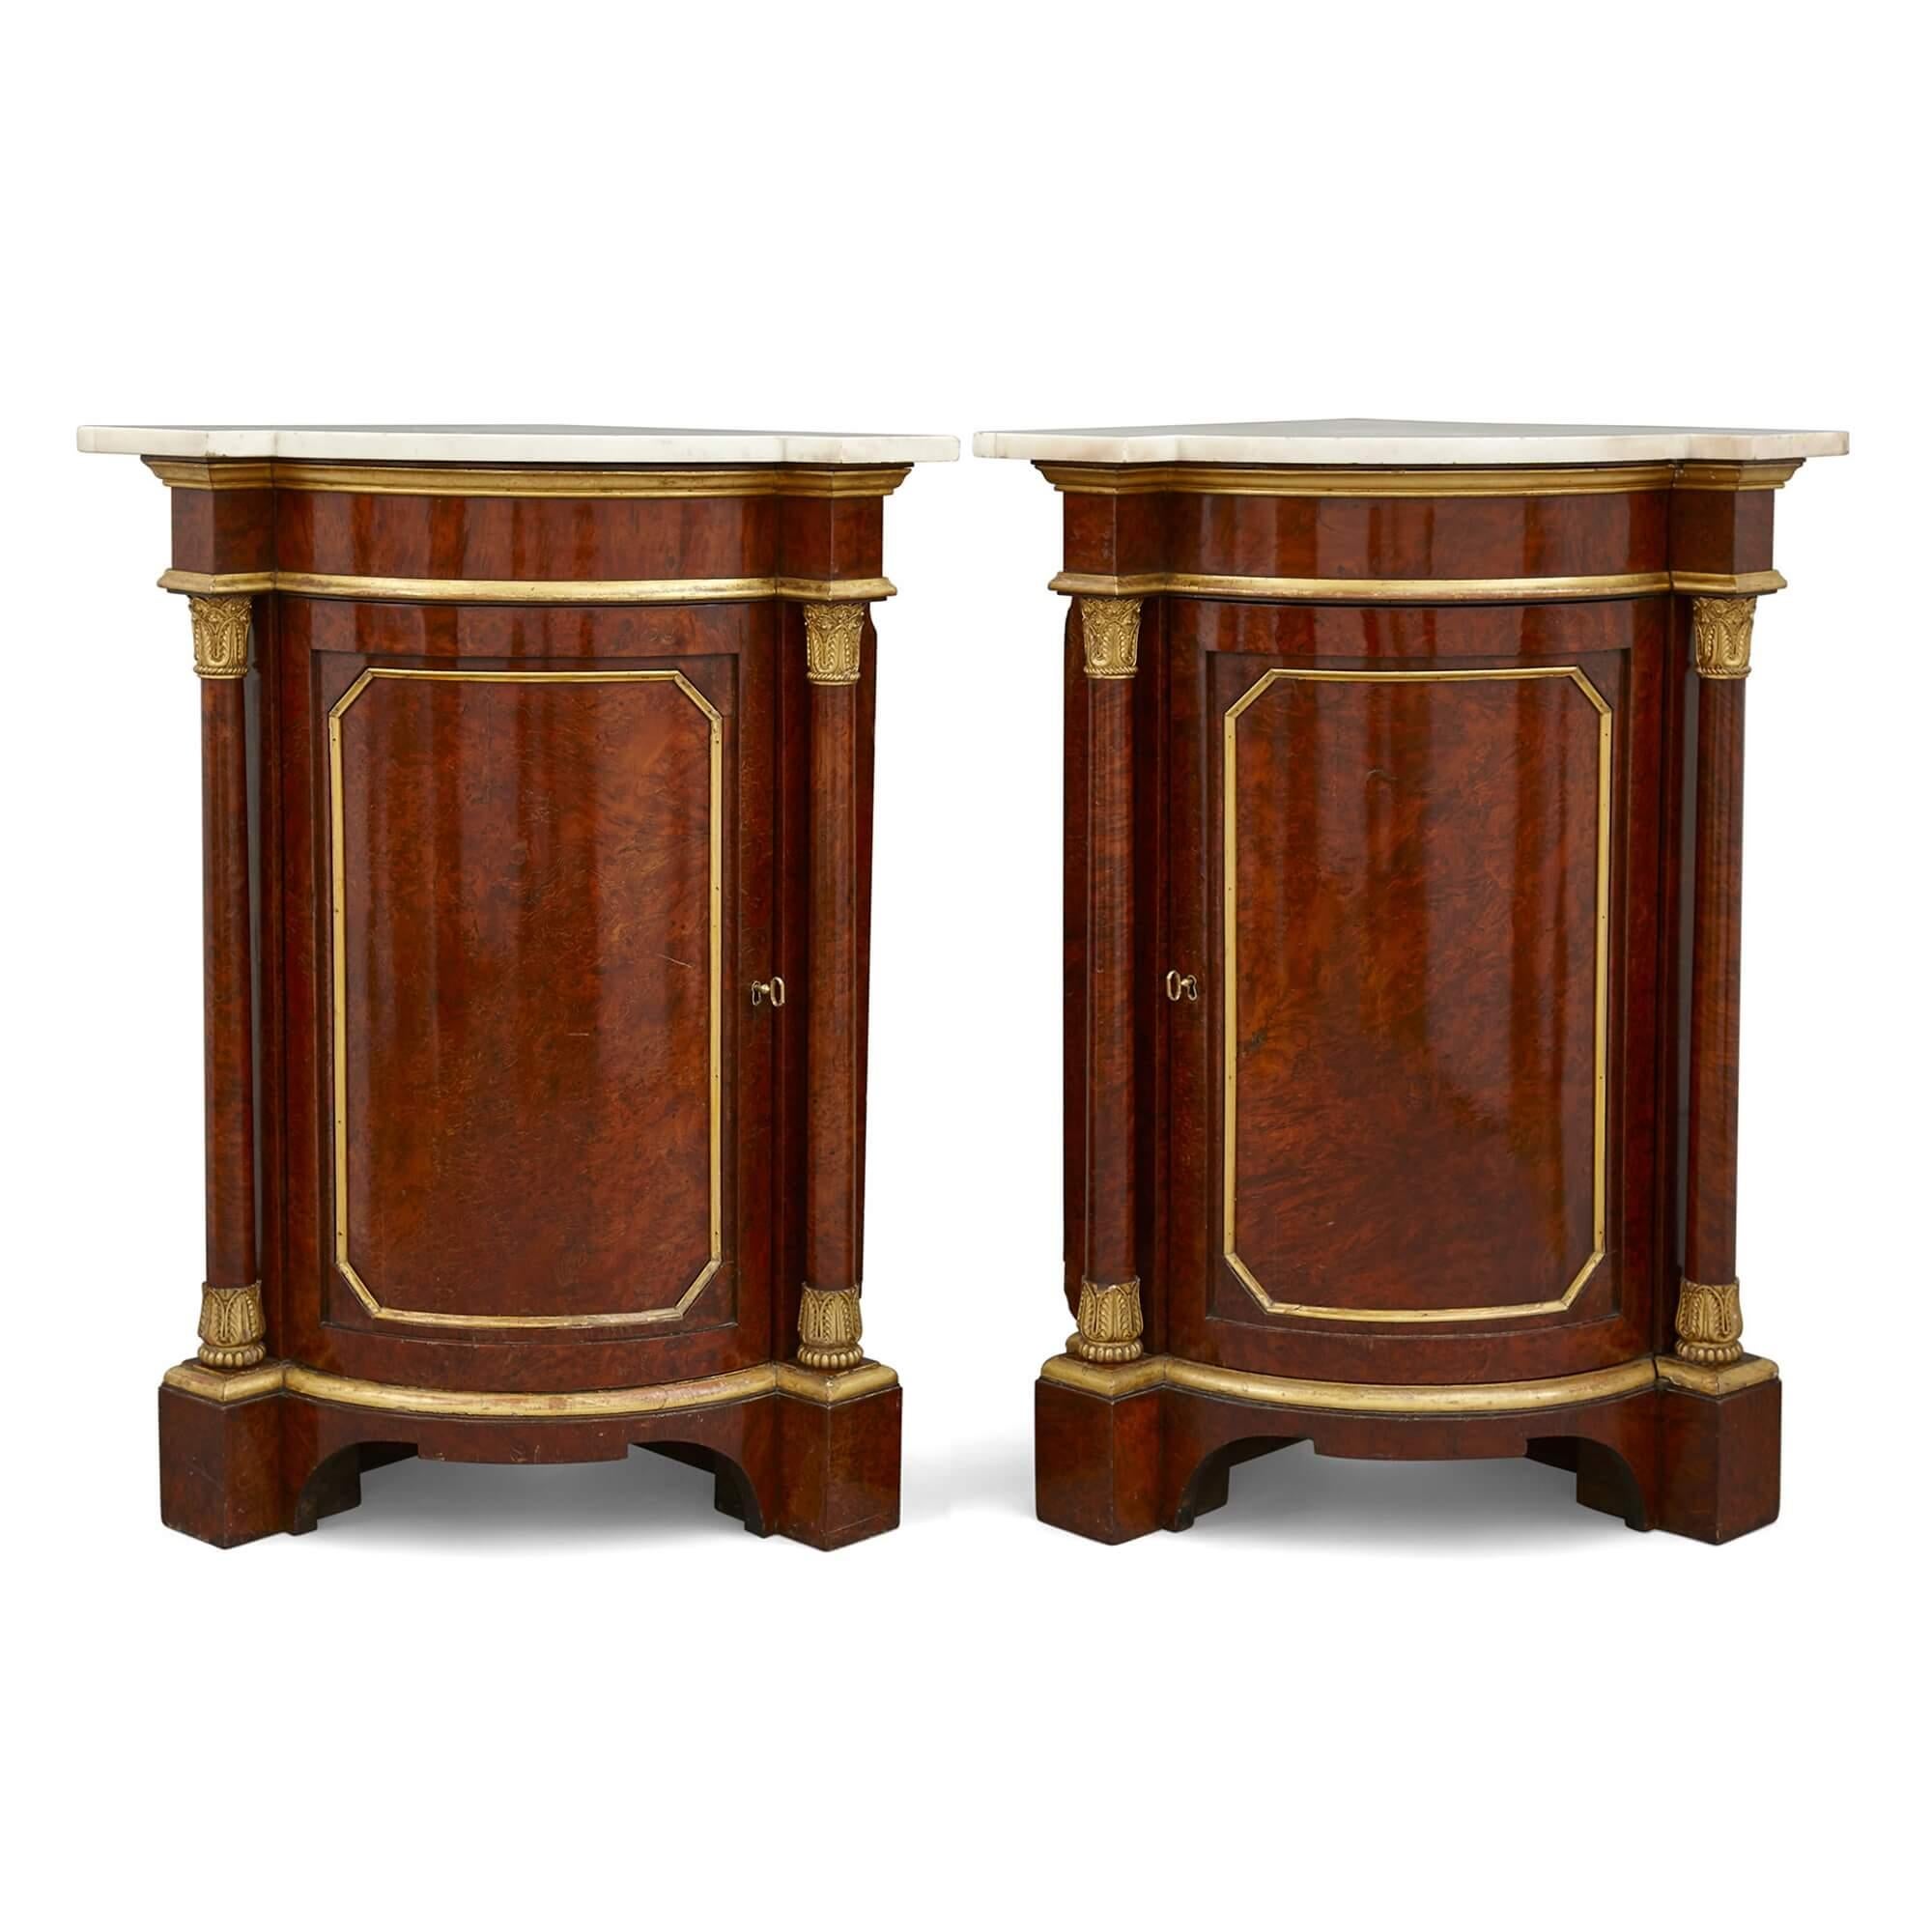 Pair of Victorian corner cabinets of Windsor Castle provenance
English, 19th Century
Measures: Height 96cm, width 74cm, depth 50cm

These superb corner cabinets are crafted from lustrous wood, gilt bronze, and marble. The cabinets feature shaped